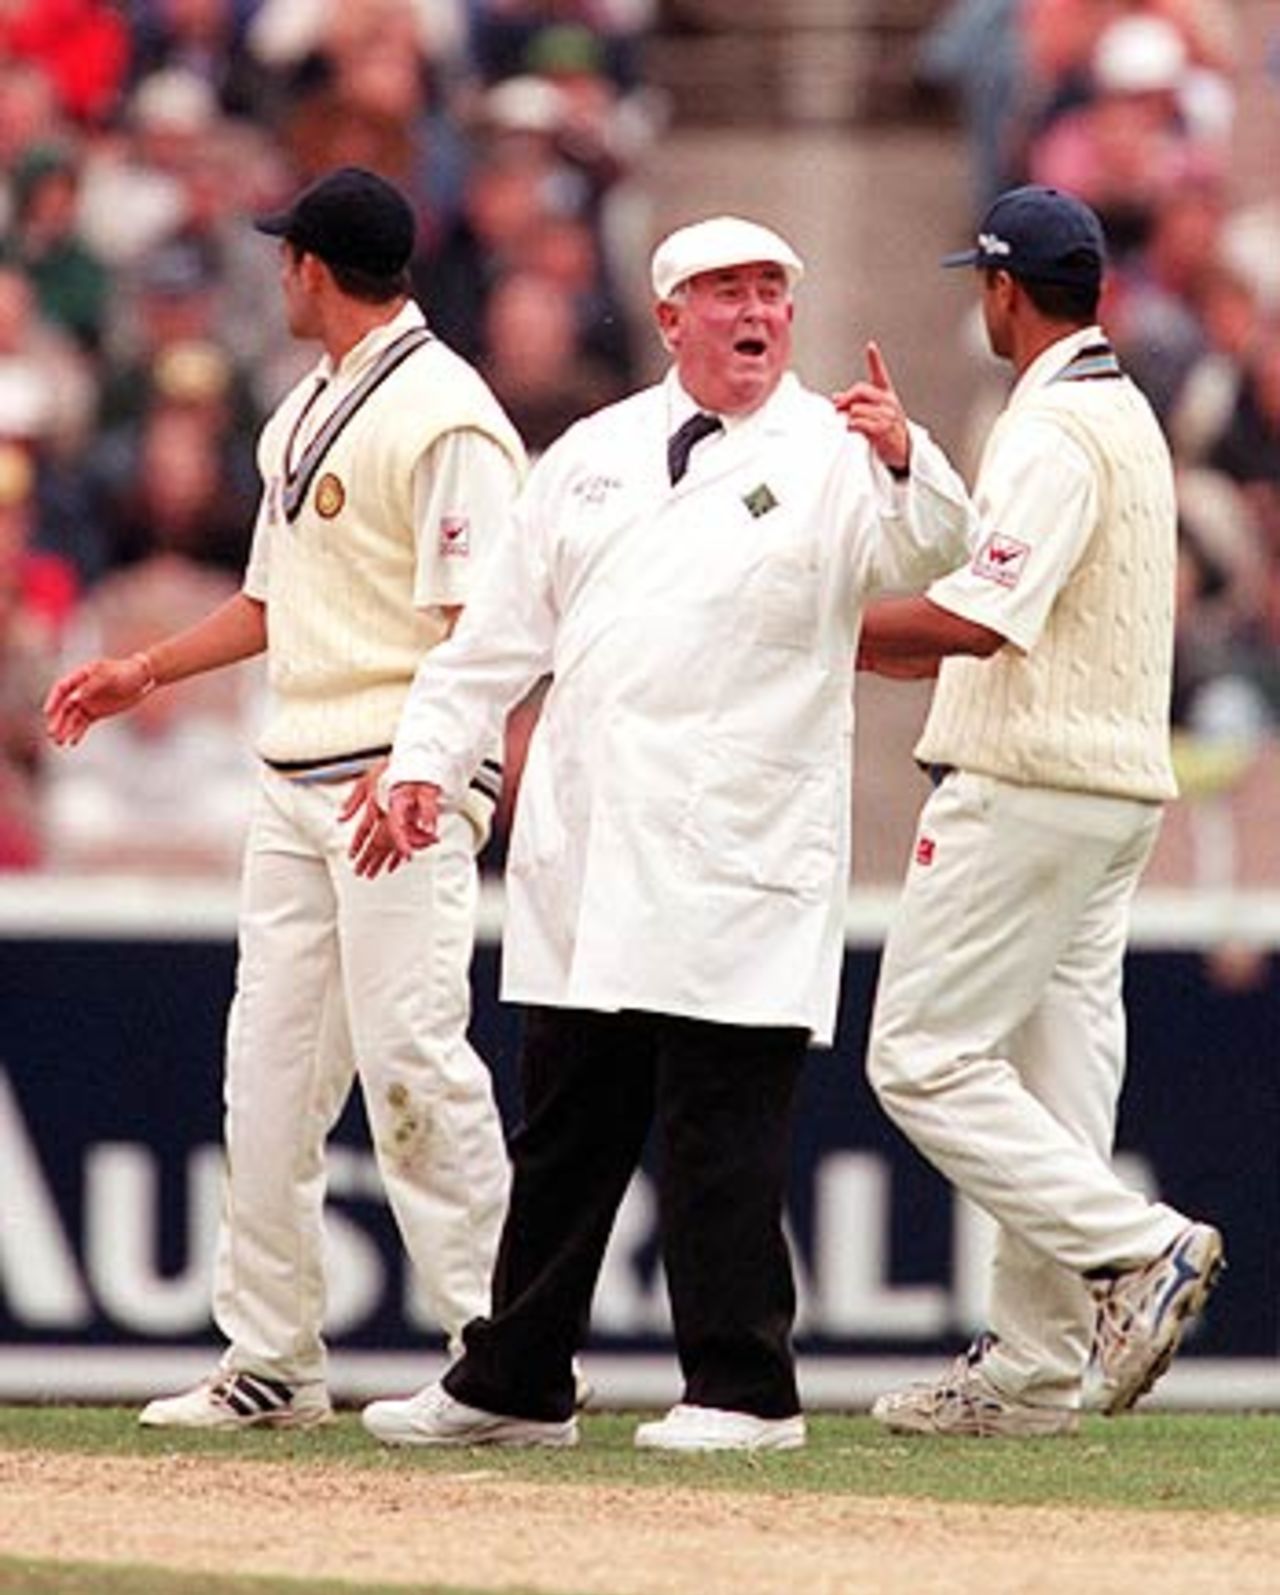 Shepherd asks Glenn McGrath (not in picture) to head towards the pavilion after he is run out in the second Test against India at Melbourne, Dec 28, 1999
